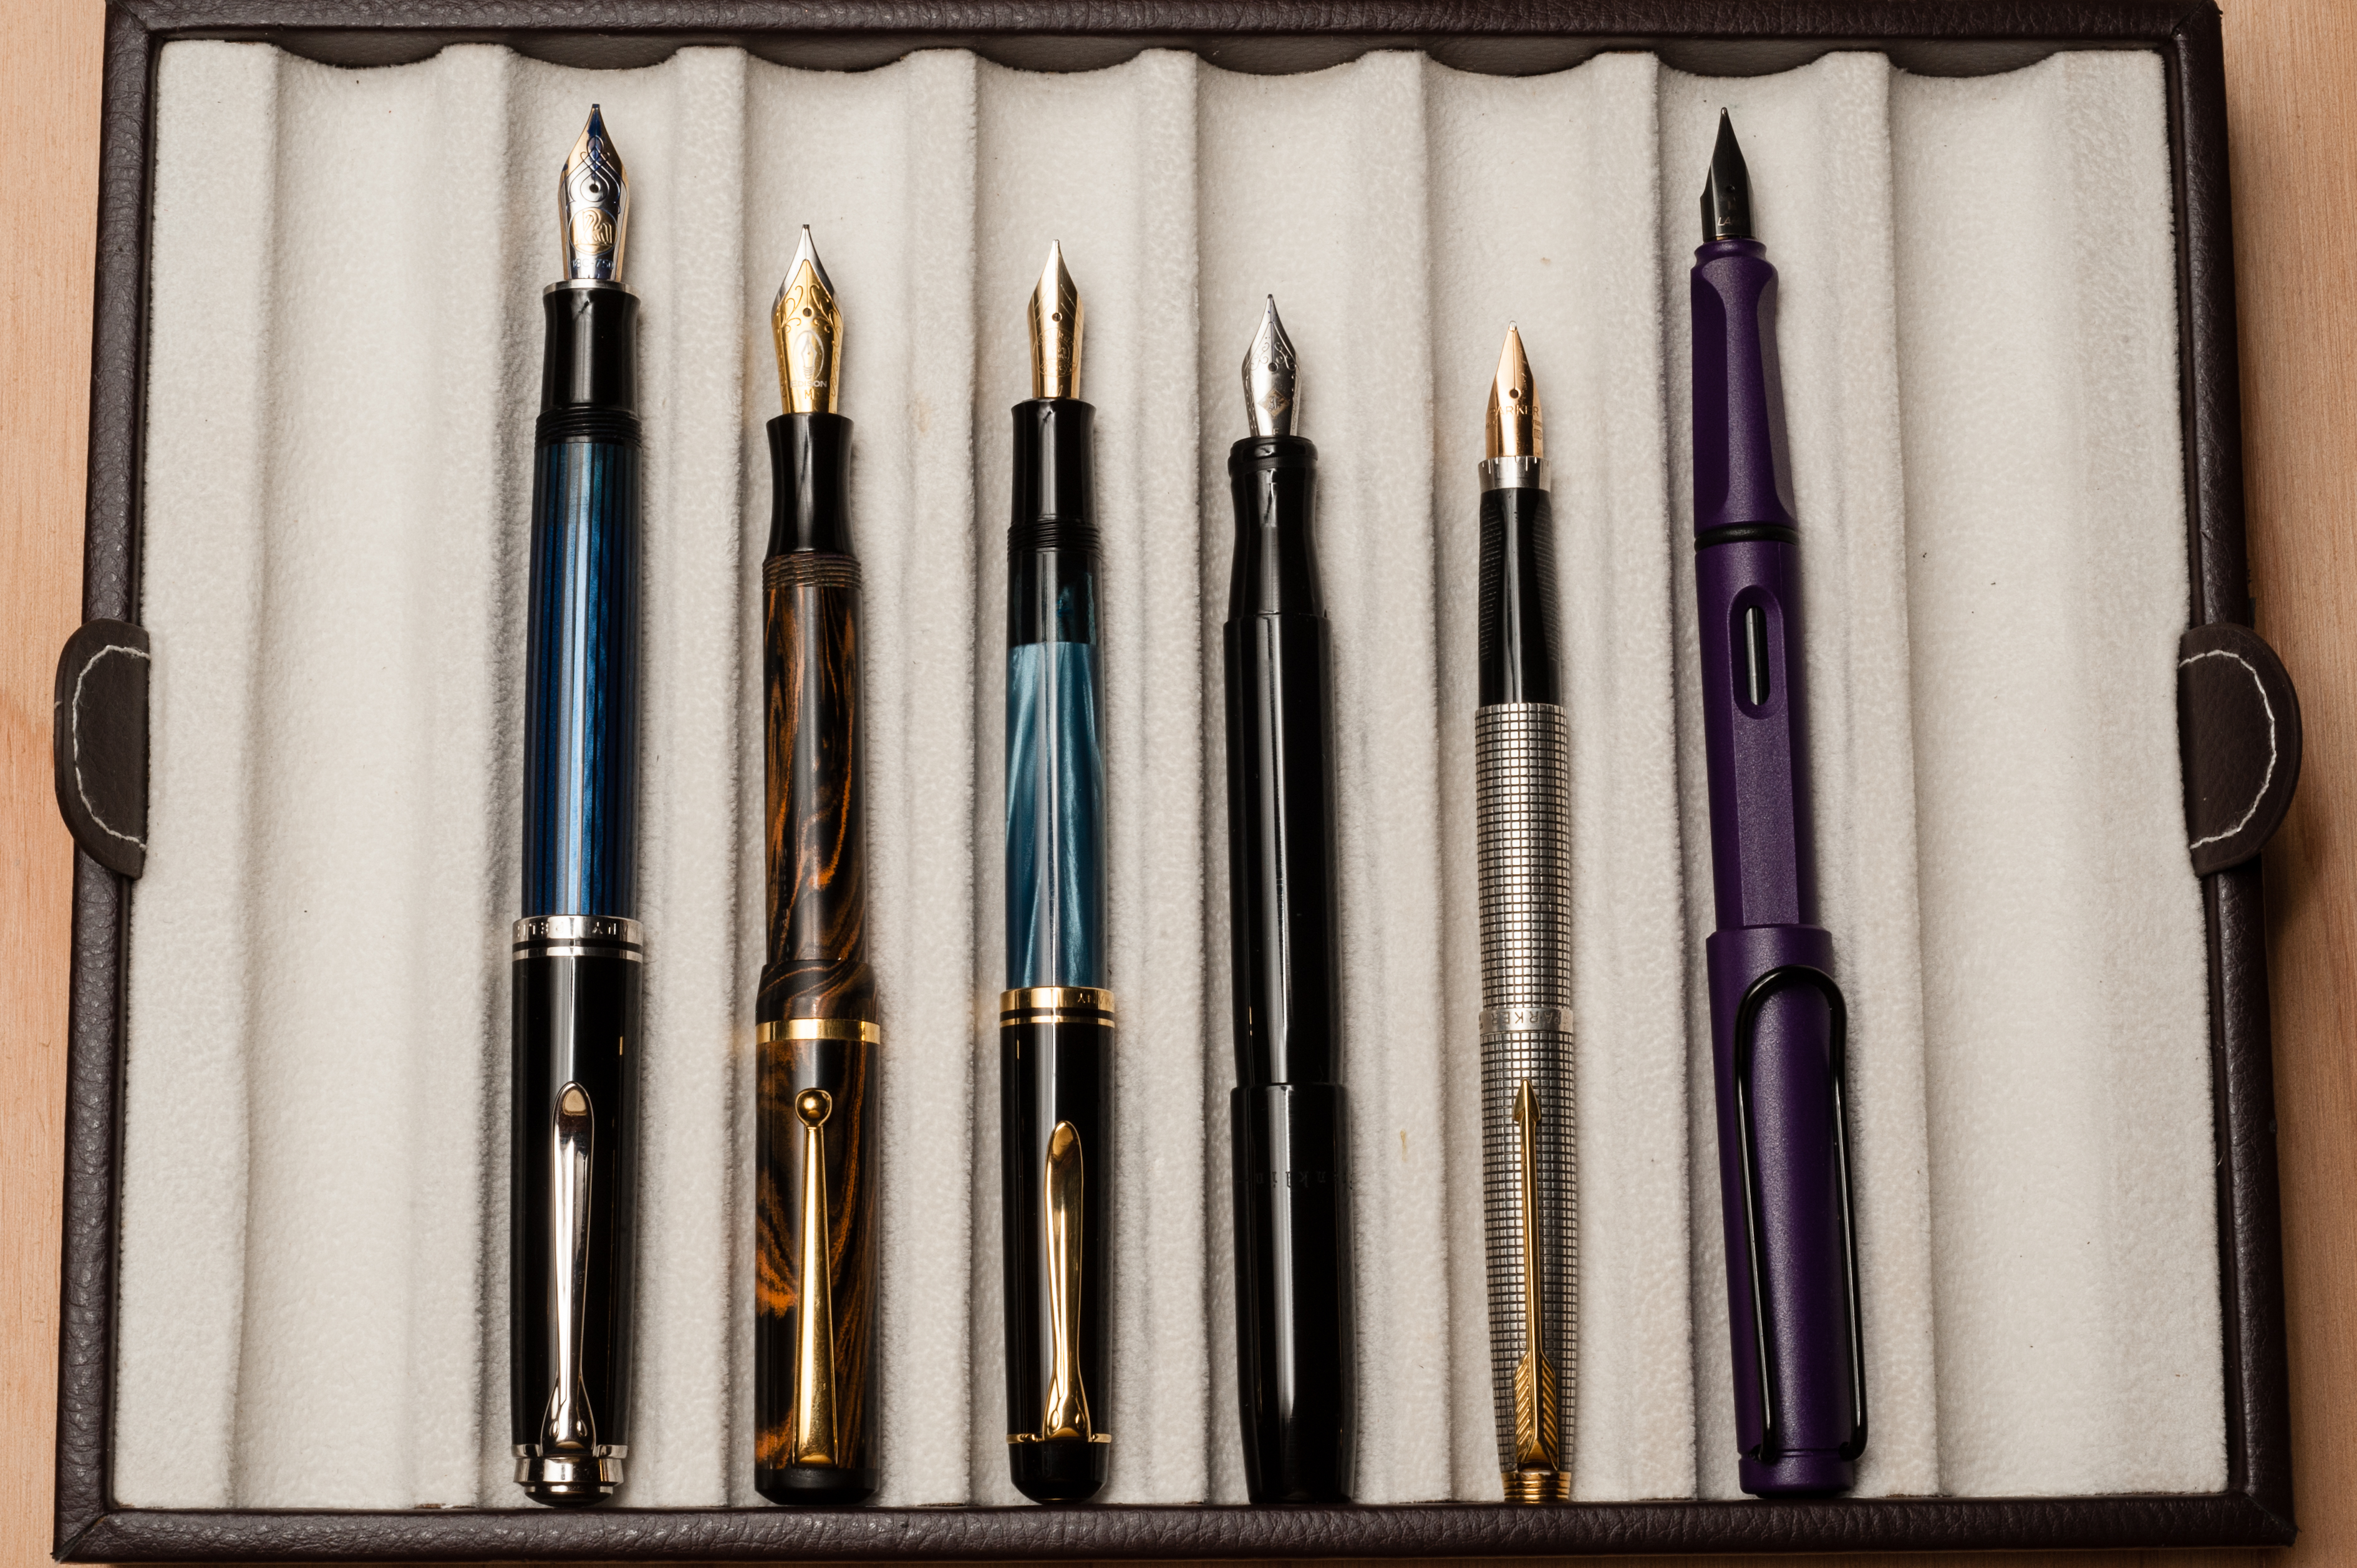 Posted cap from left to right: Pelikan M805, Edison Beaumont, Pelikan M200, Franklin-Christoph Model 45, Parker 75, and Lamy Safari